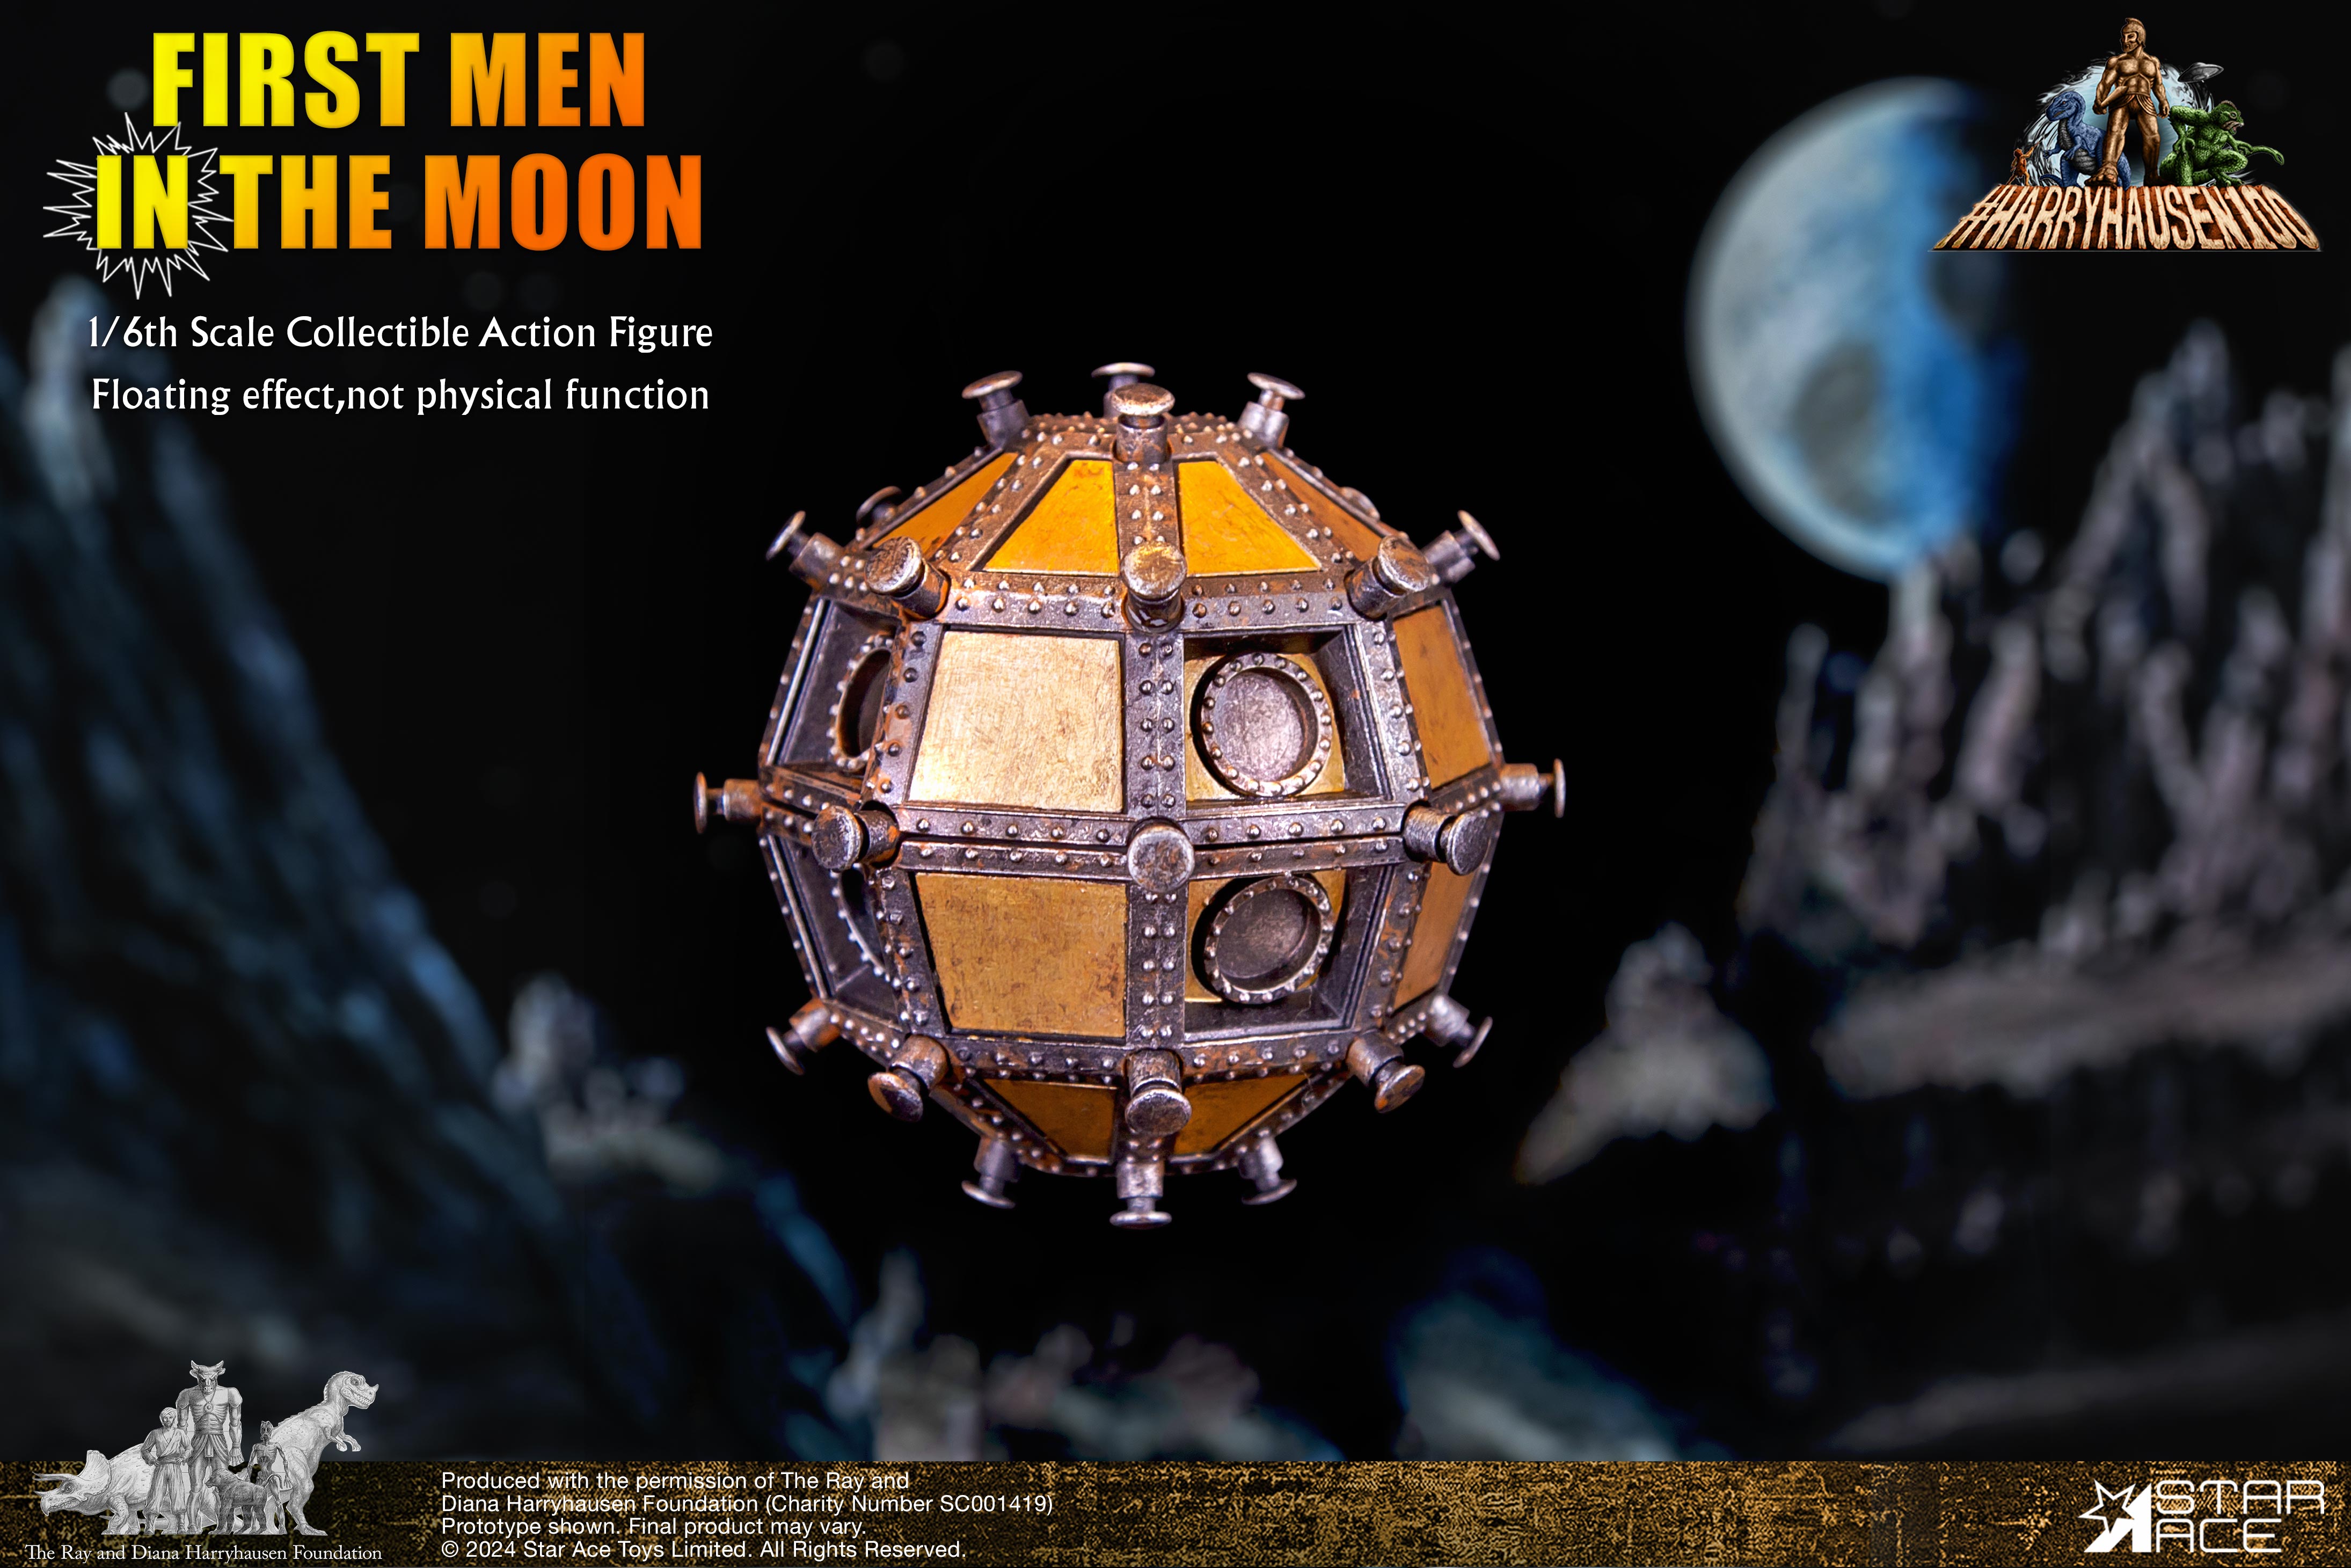 First Men in the Moon: Arnold Bedford: Deluxe Version: Sixth Scale: Star Ace